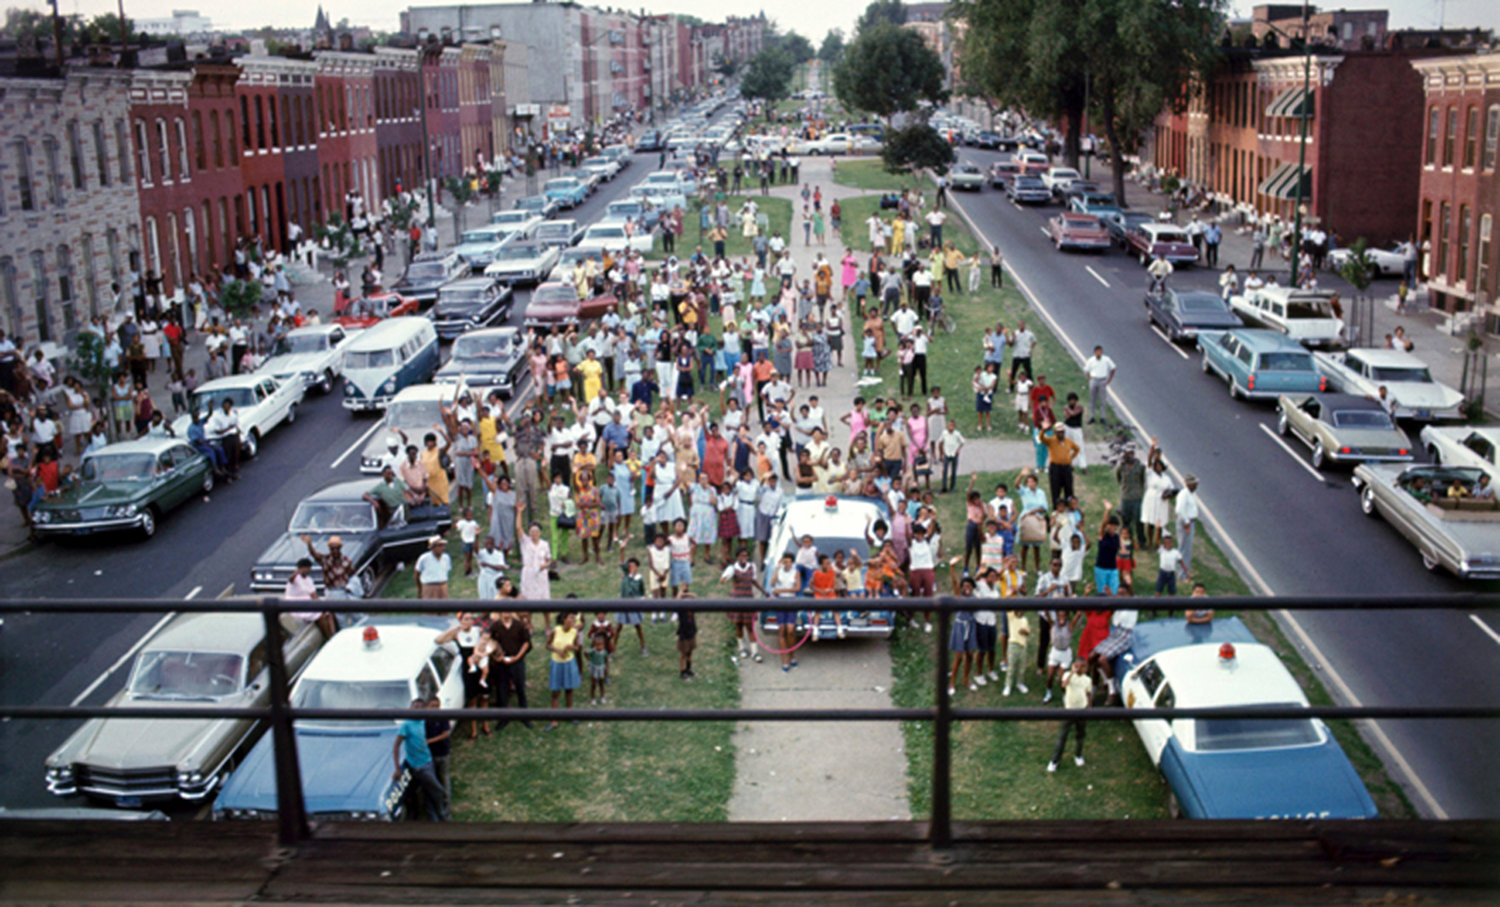 In Baltimore on June 8, 1968 and across the country, people lined up to watch the Robert F. Kennedy funeral train. (Bill Eppridge/Baltimore Sun/TNS)